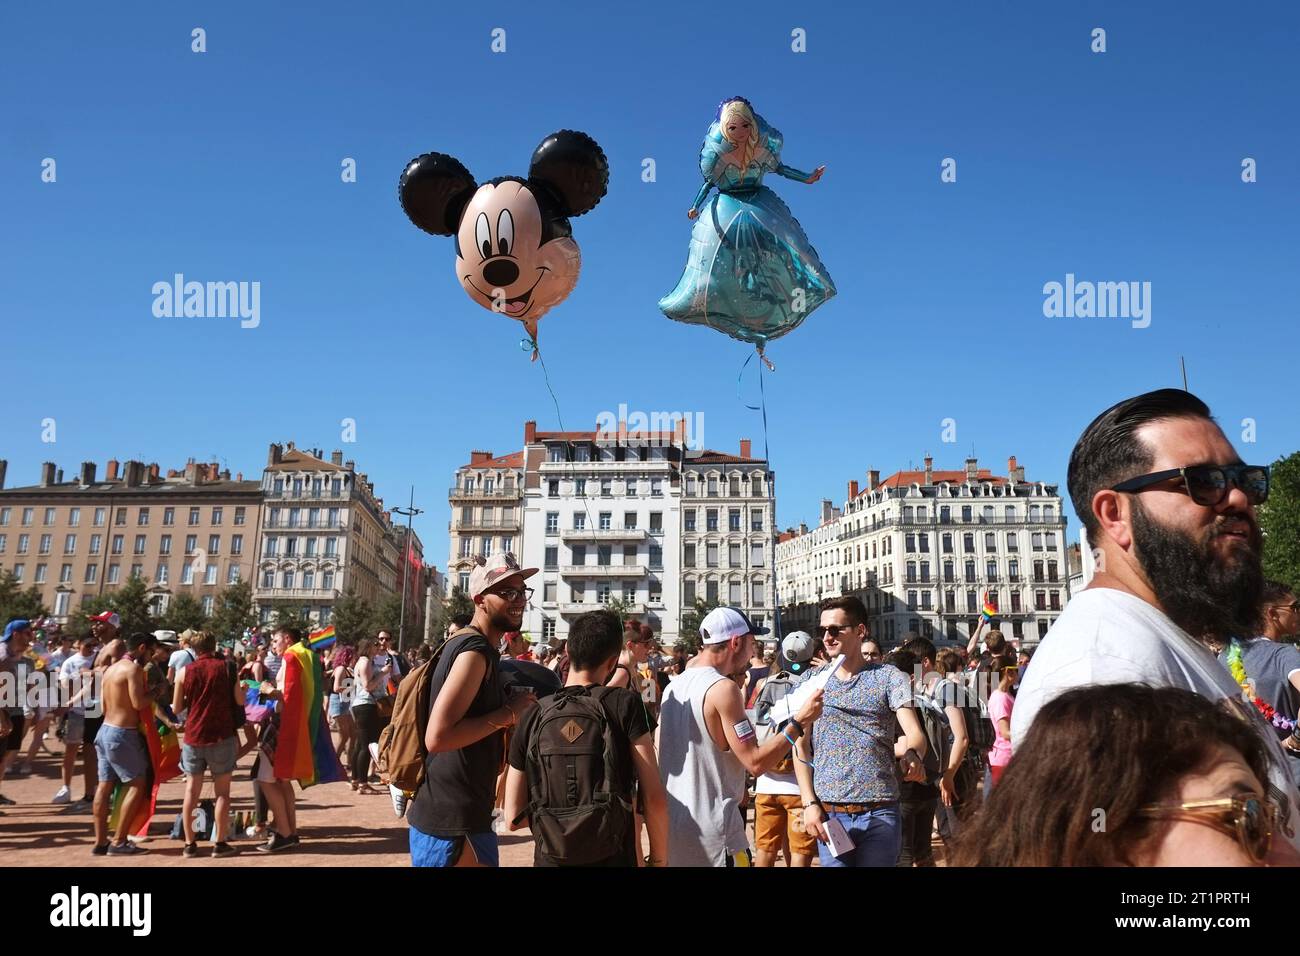 Micky Mouse and Disney Princess balloons float above a PRIDE March, lgbtqi+ people and celebrations in Place Bellecour,  Lyon, France Stock Photo